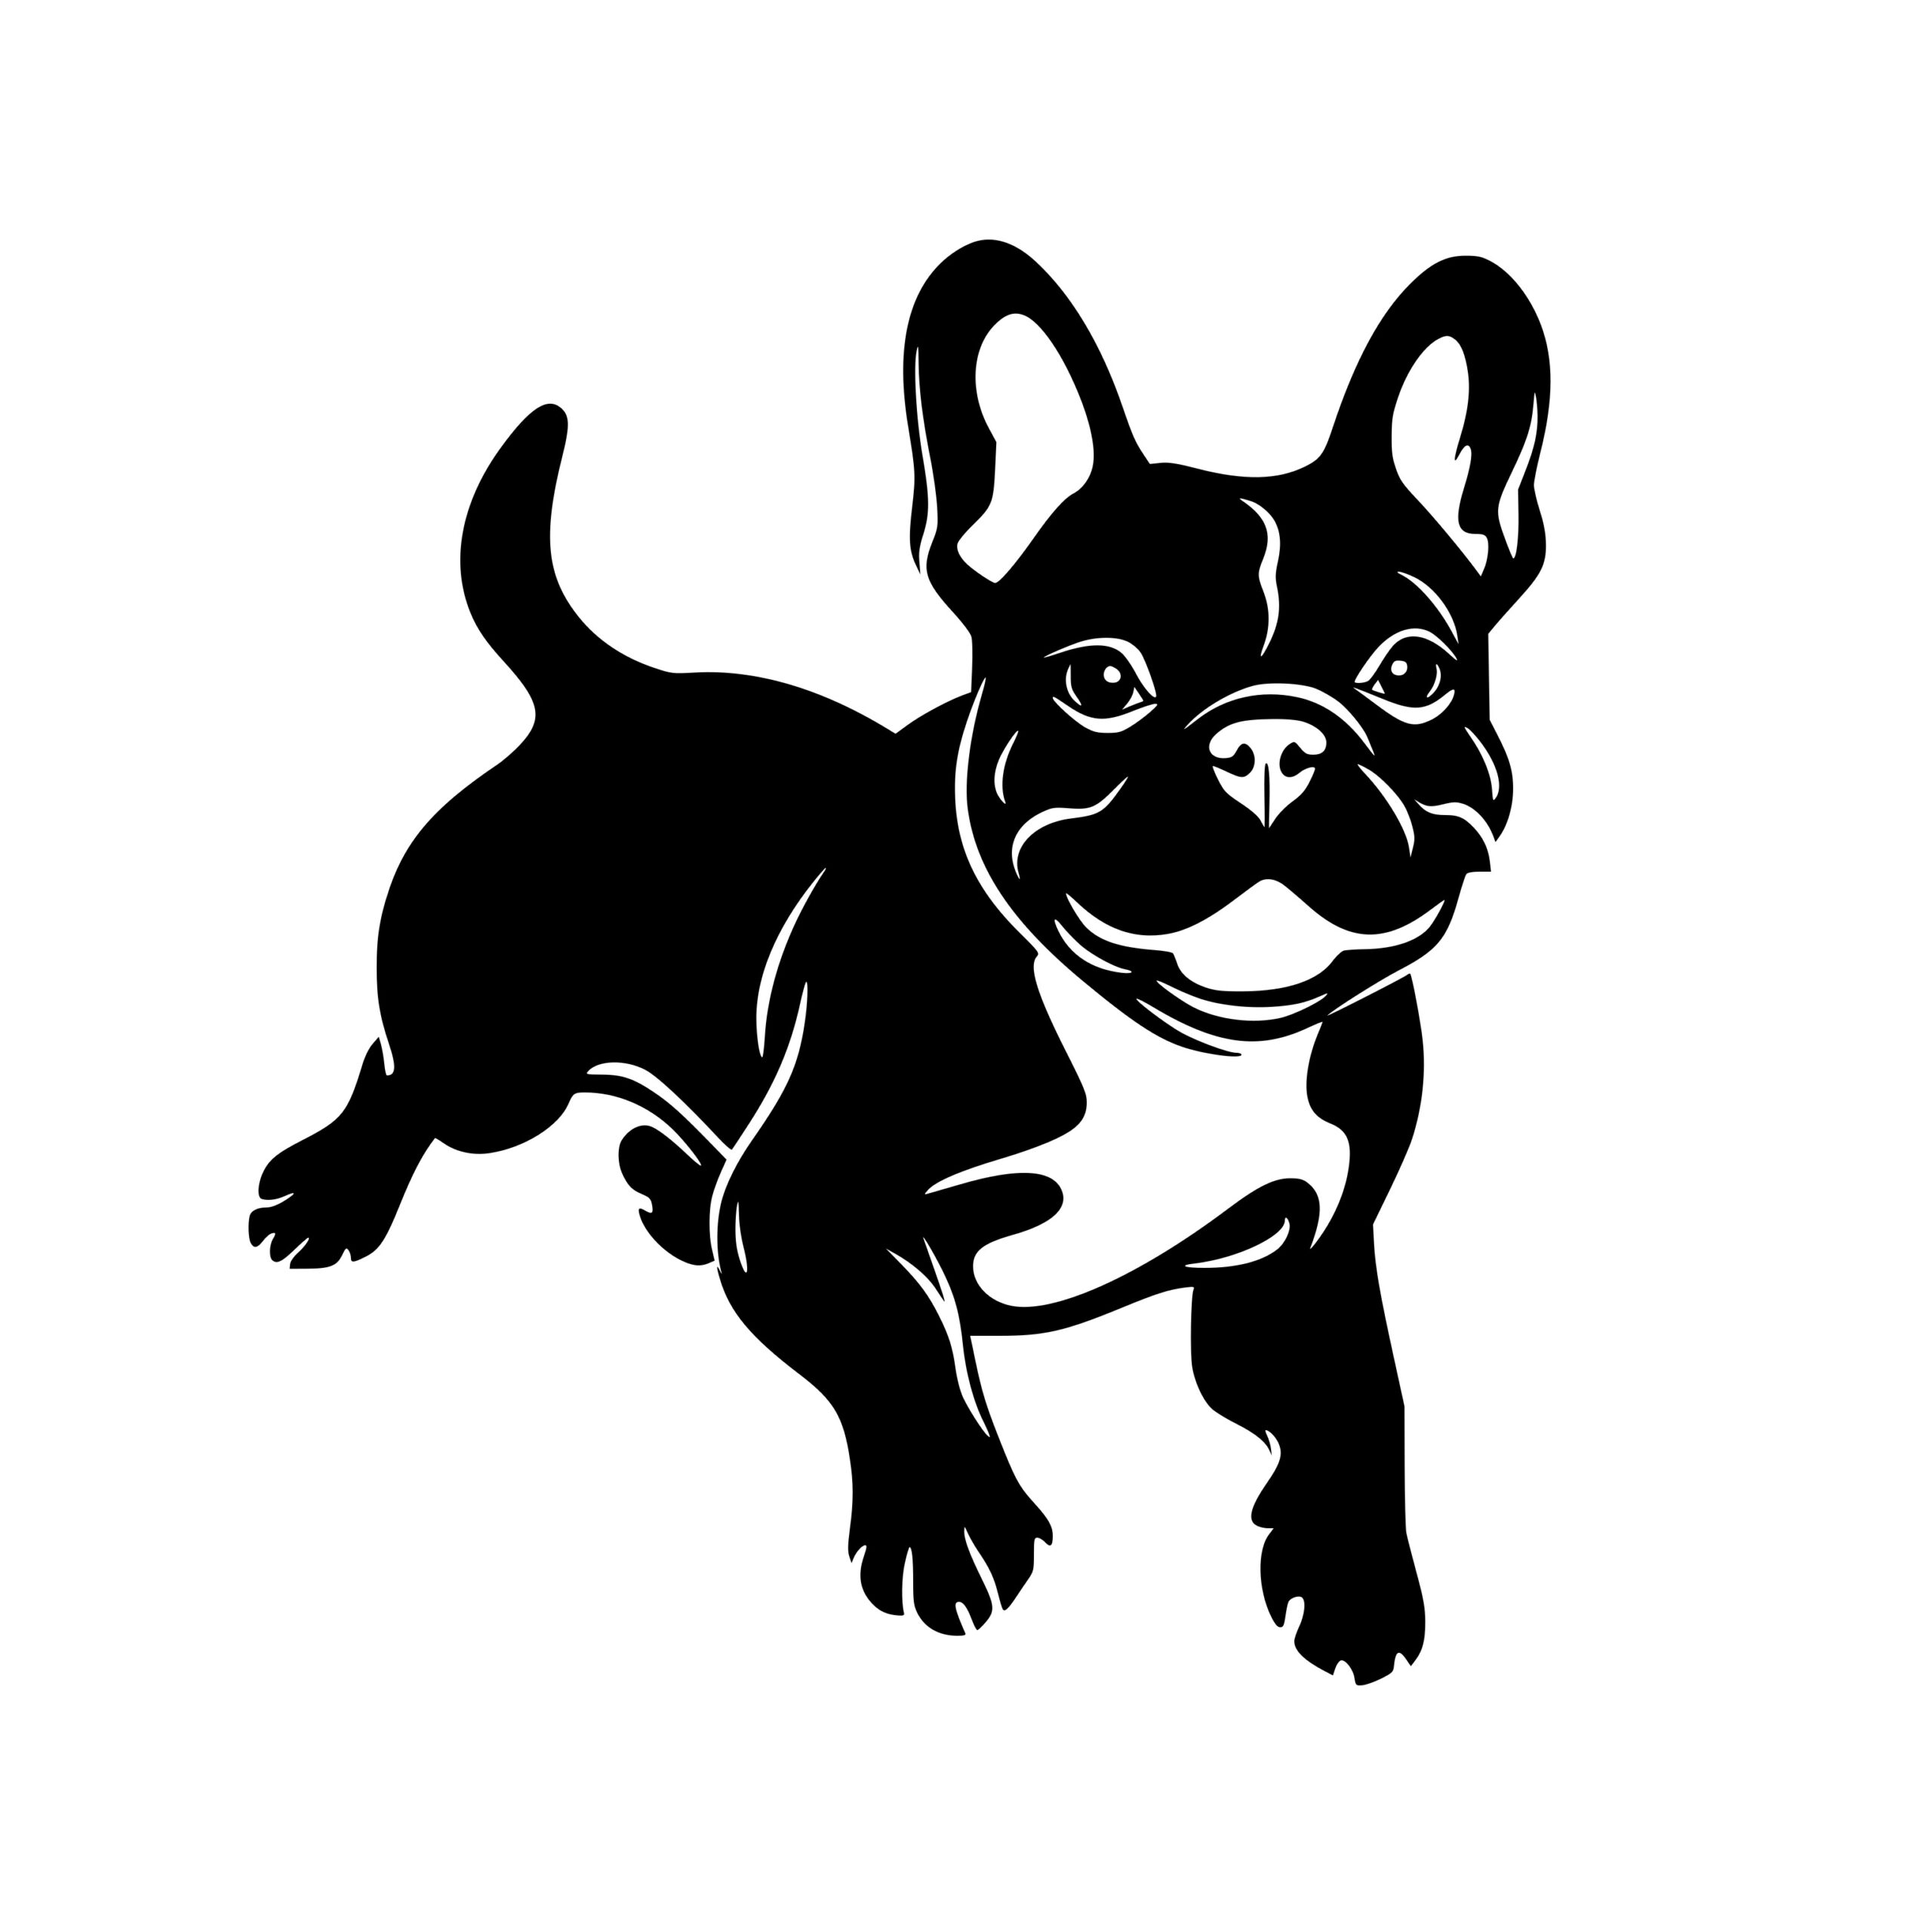 Playful Pooch SVG File for Cricut, Silhouette, Laser Machines